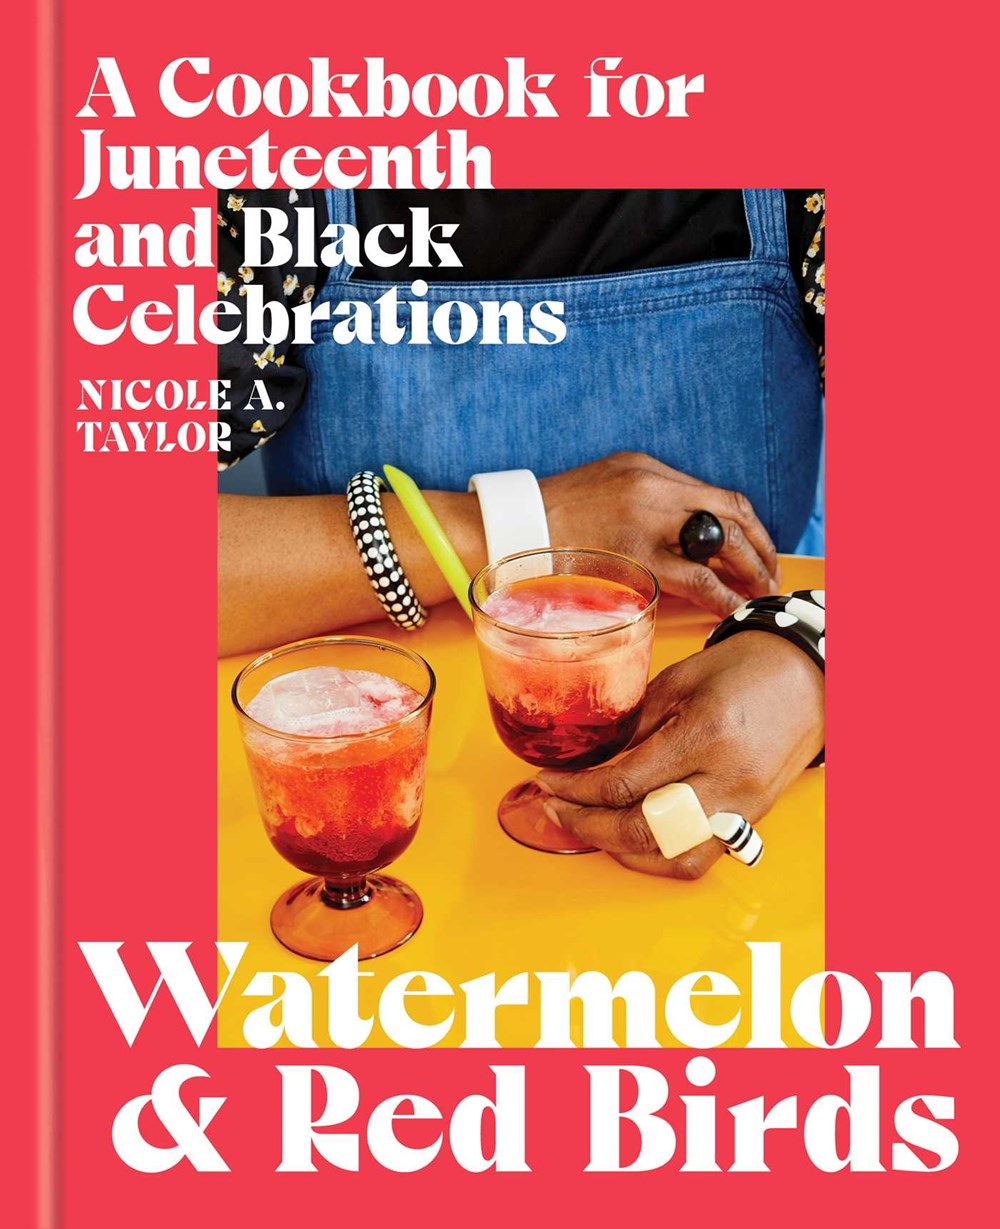 Image of "Watermelon and Red Birds: A Cookbook for Juneteenth and Black Celebrations"